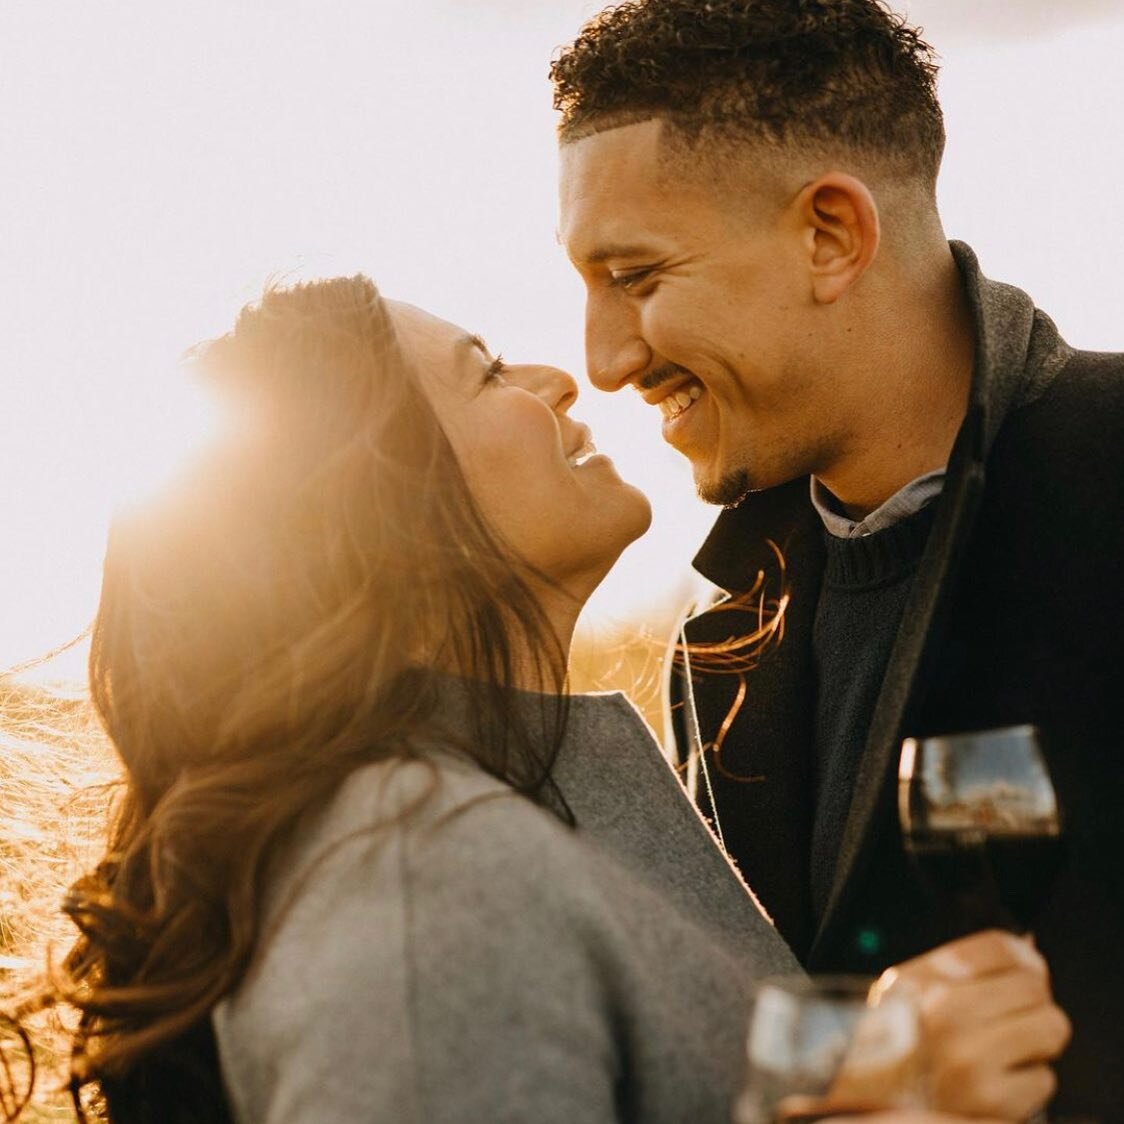 Cheers to a lifetime of love and happiness. 
We love making our clients look and feel beautiful during all of their special milestones. 

Book us for your engagement session! 

.
.
.
#northforkweddings  #longislandwedding #pindar #pindarvineyard #NOF